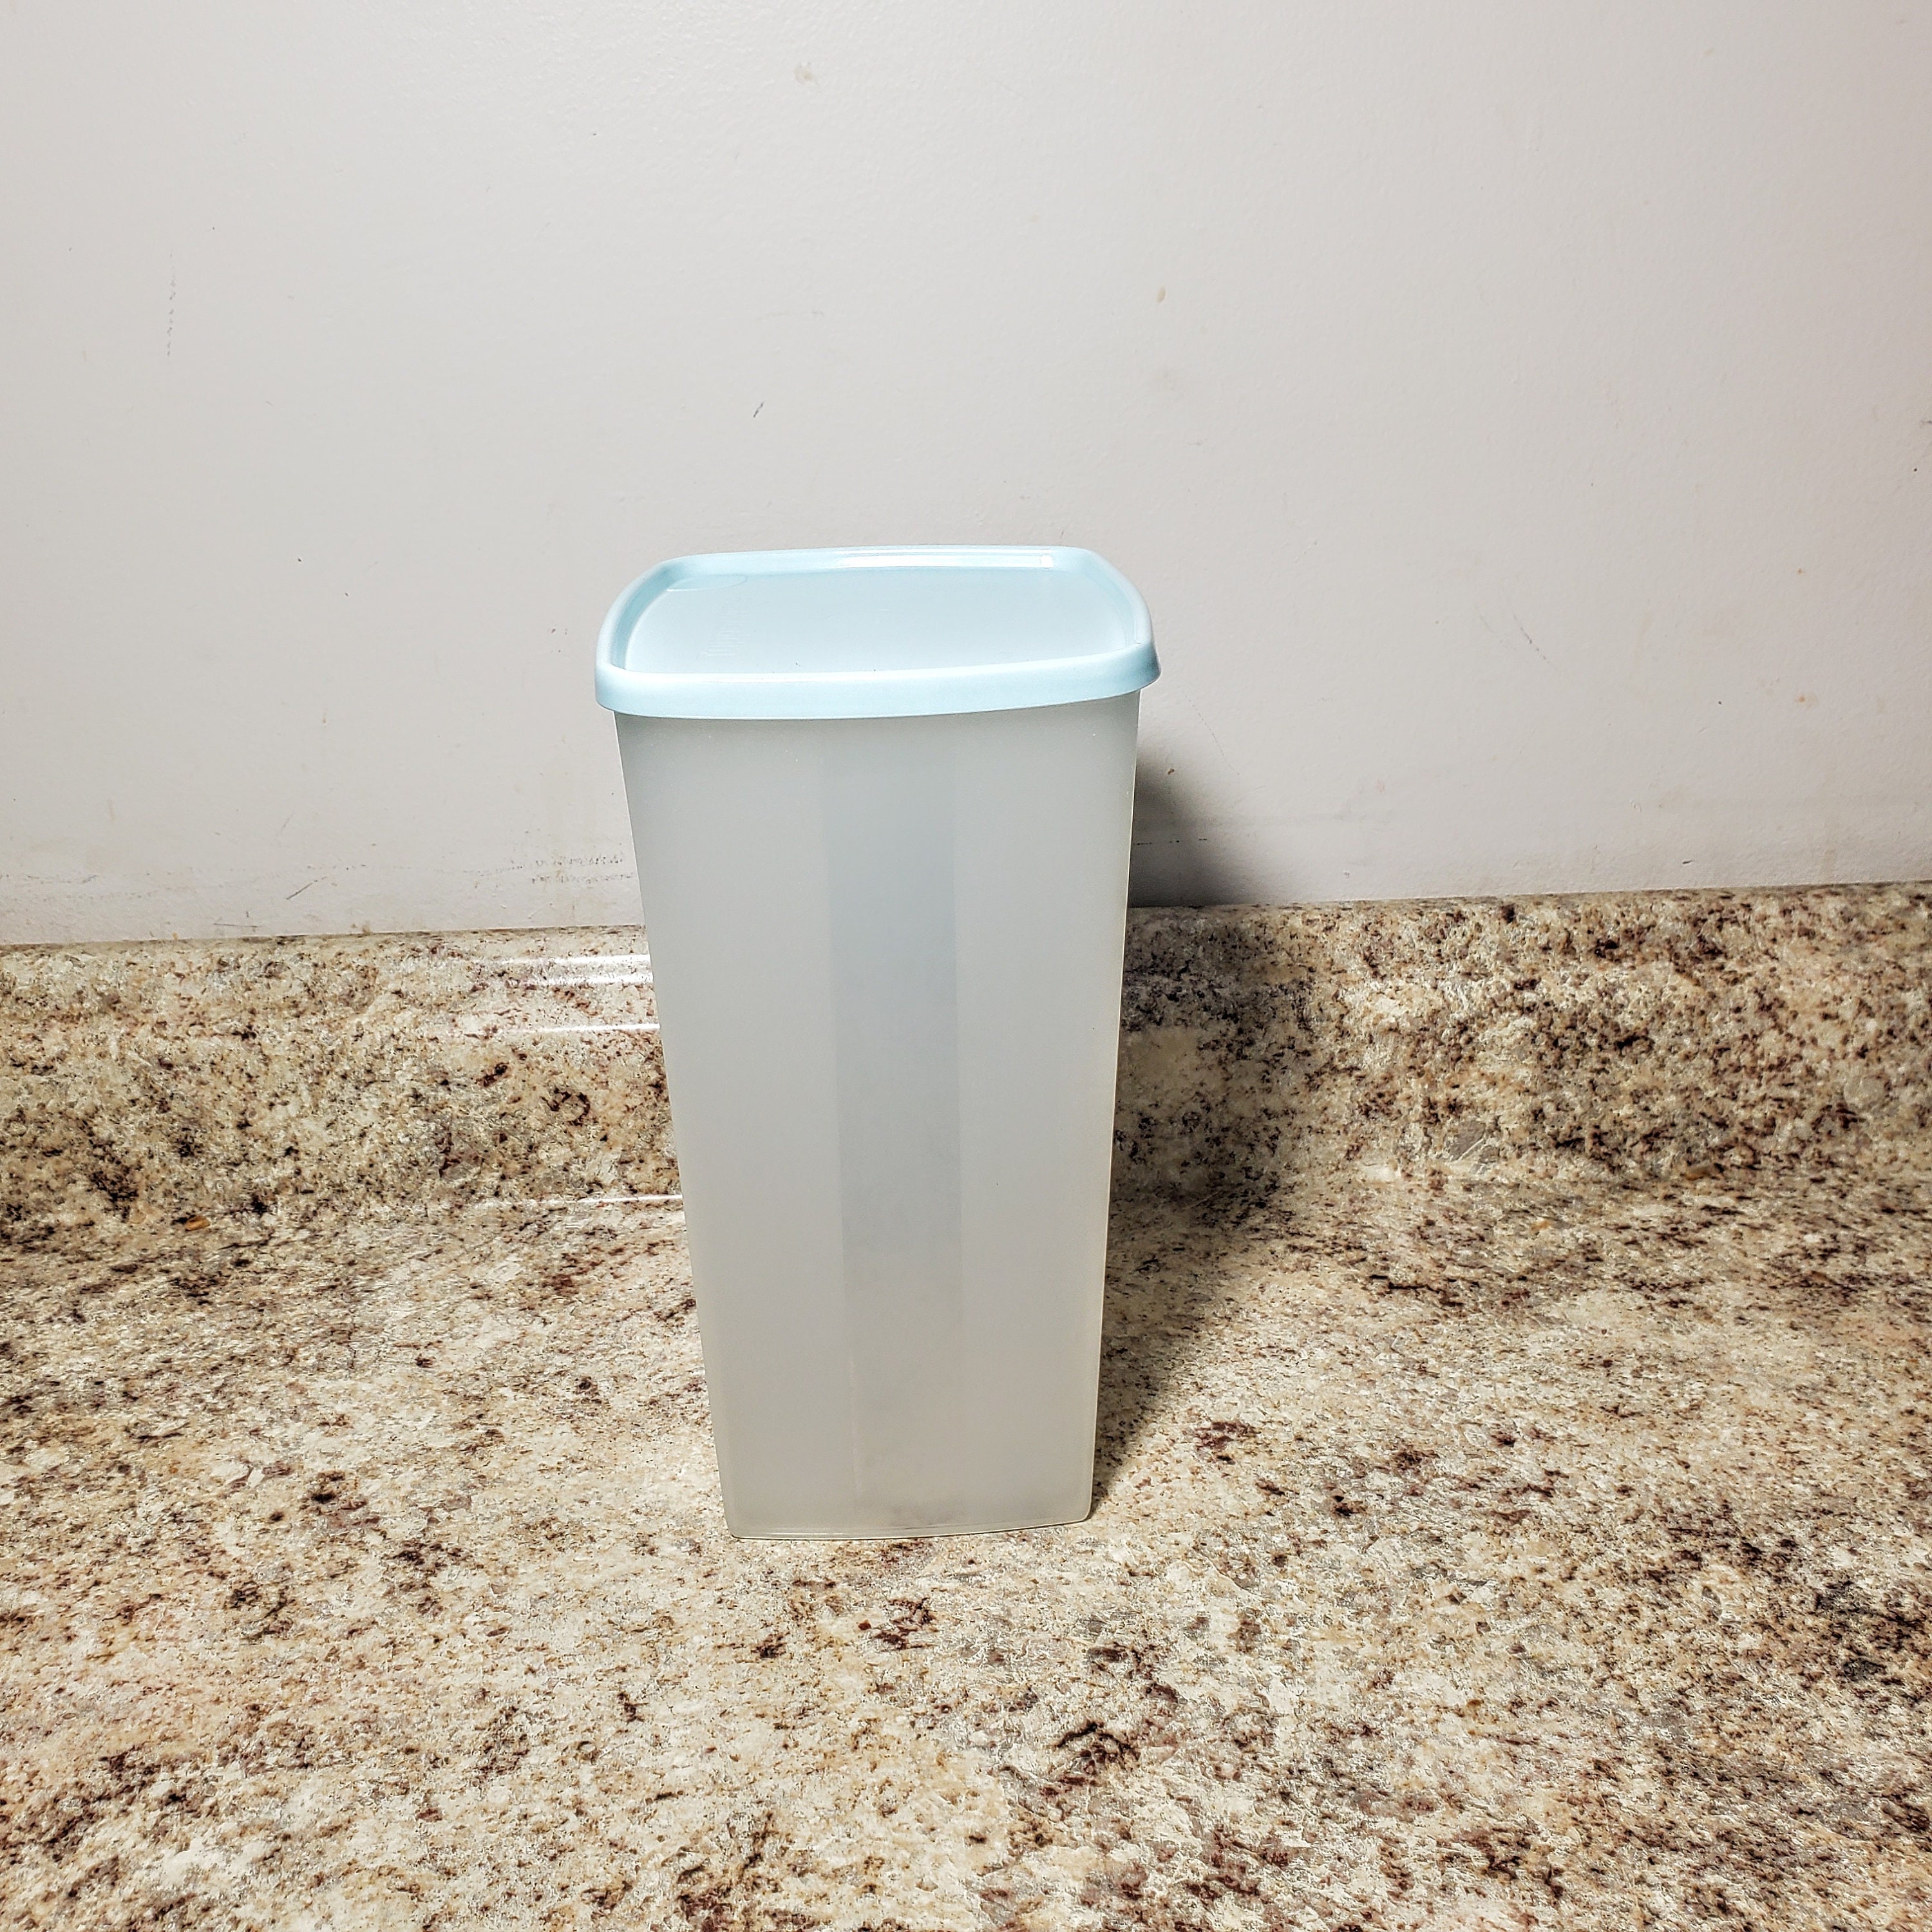 Tupperware, Kitchen, 3 Tupperware Sheer Square Freezer Containers 31 W 3  Lids 31 Mixed Eras Blue